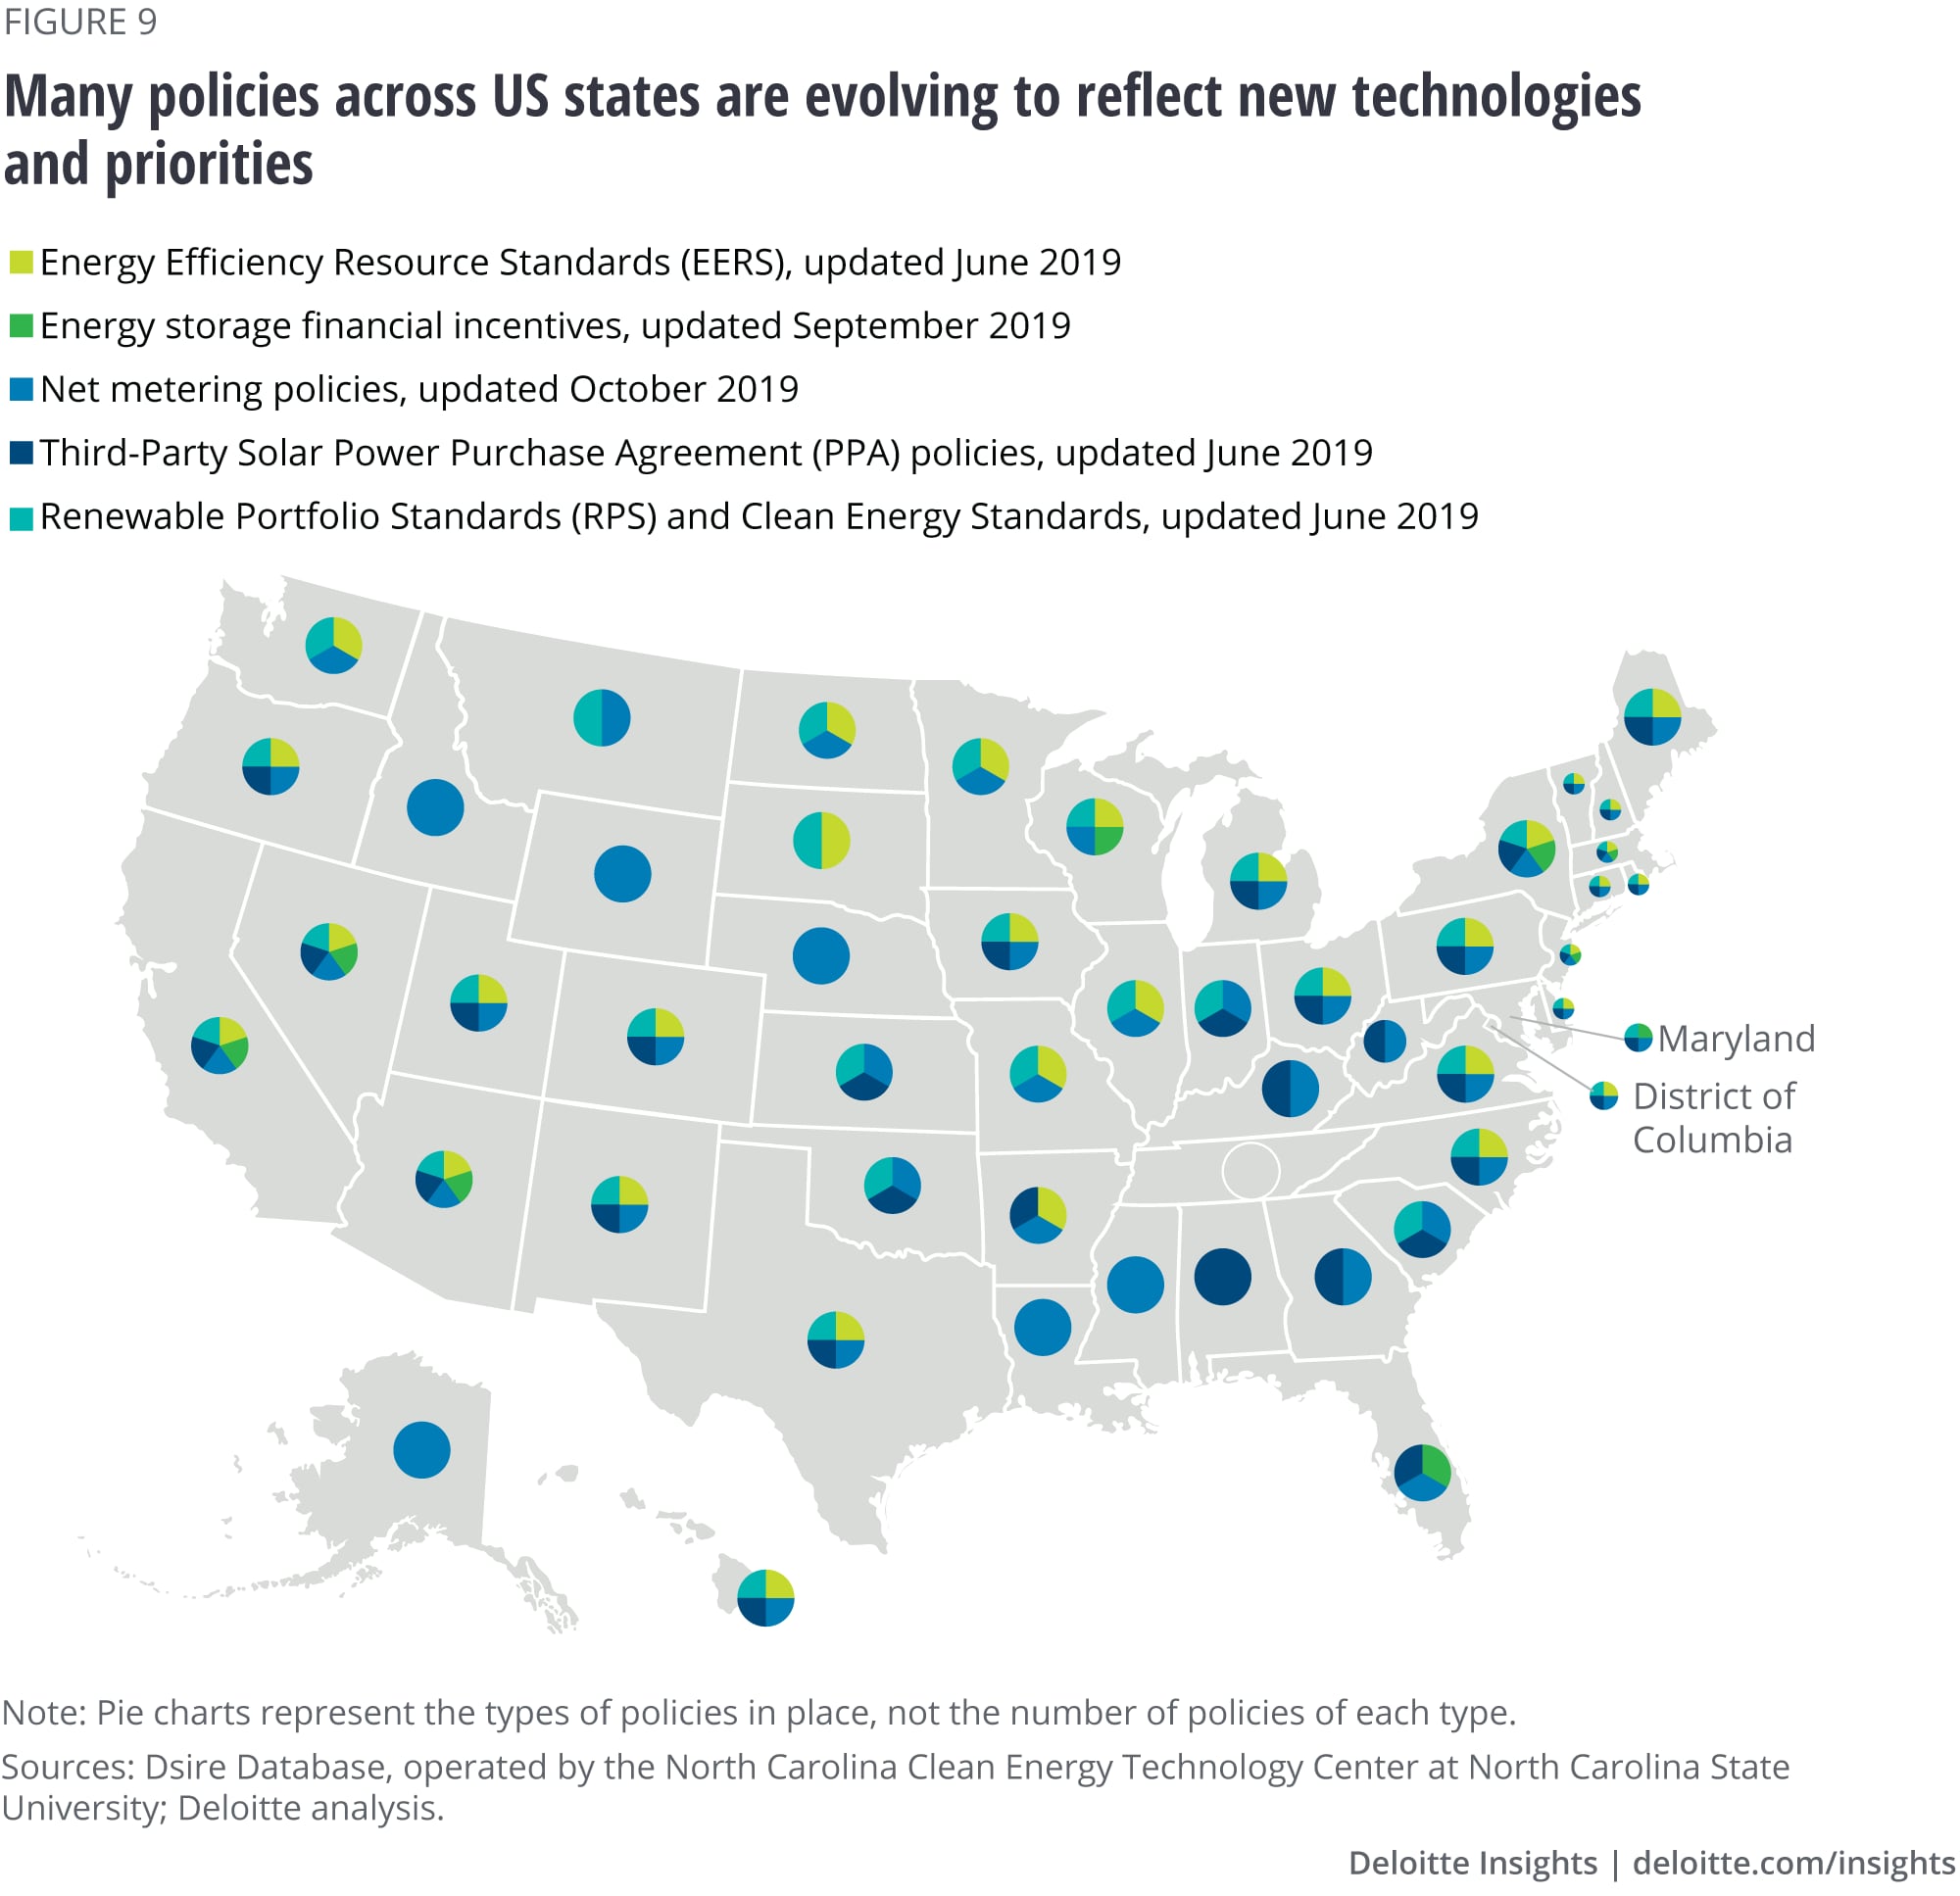 Many policies across US states are evolving to reflect new technologies and priorities